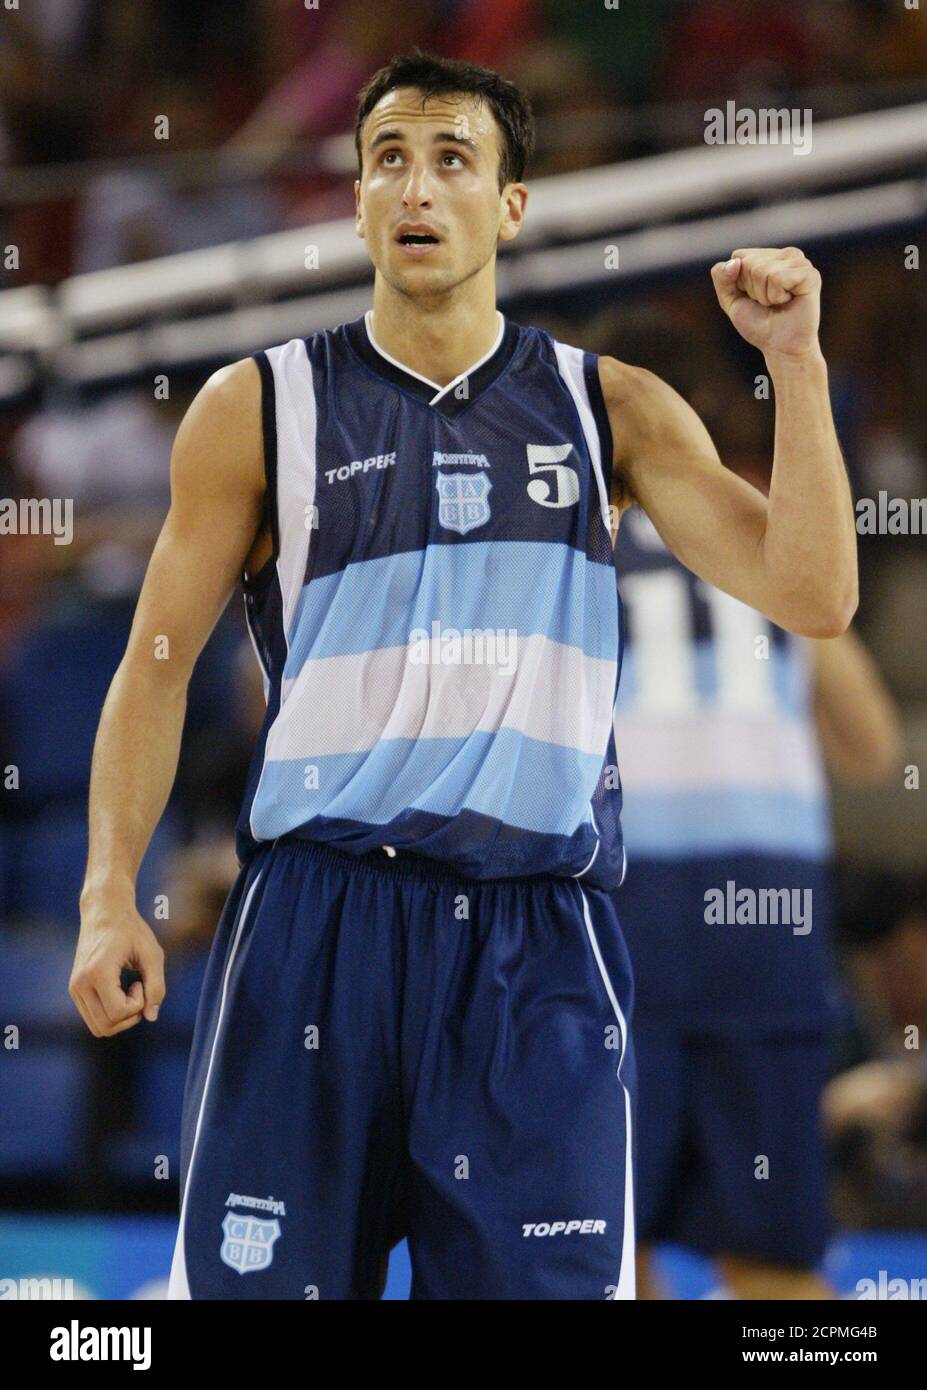 Argentina's Emanuel David Ginobili celebrates his basket to defeat New  Zealand in preliminary basketball action at the Athens 2004 Olympic Games  August 21, 2004. Argentina defeated New Zealand 98-96. REUTERS/Adrees Latif  AC/SV